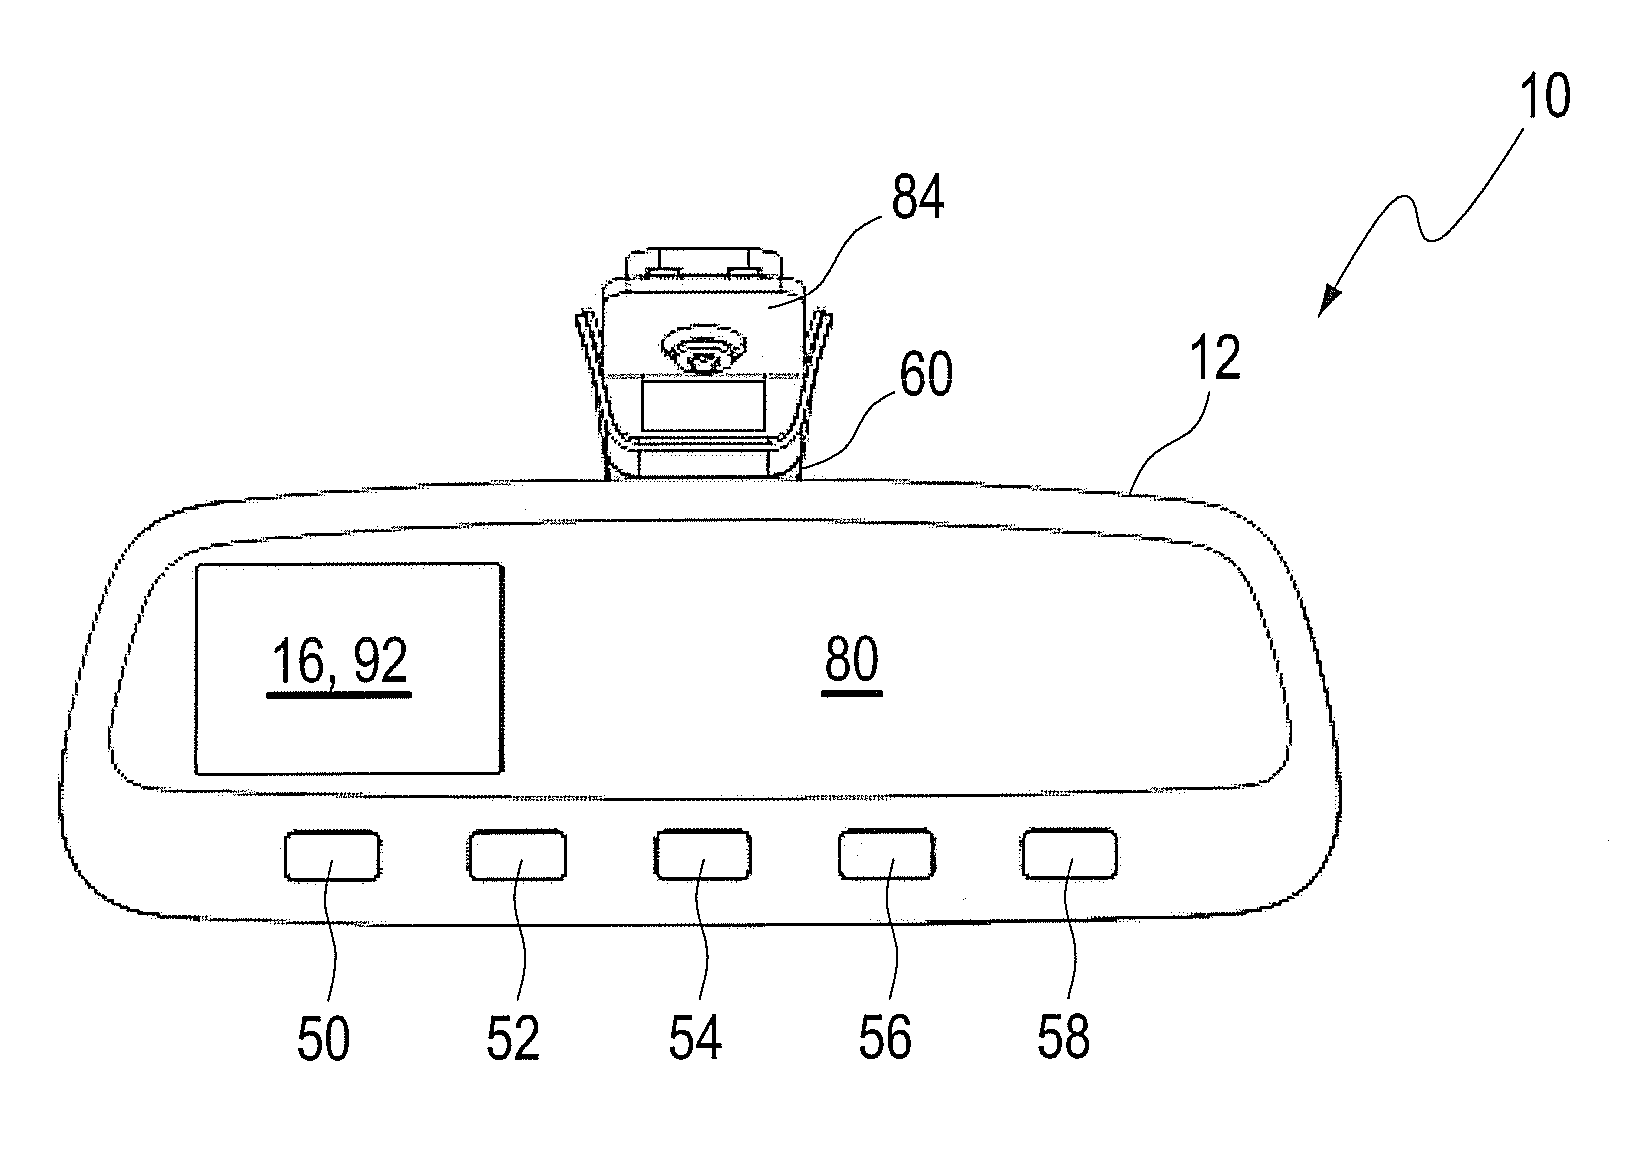 Rear view mirror for a vehicle with an antenna module and an electronic display module